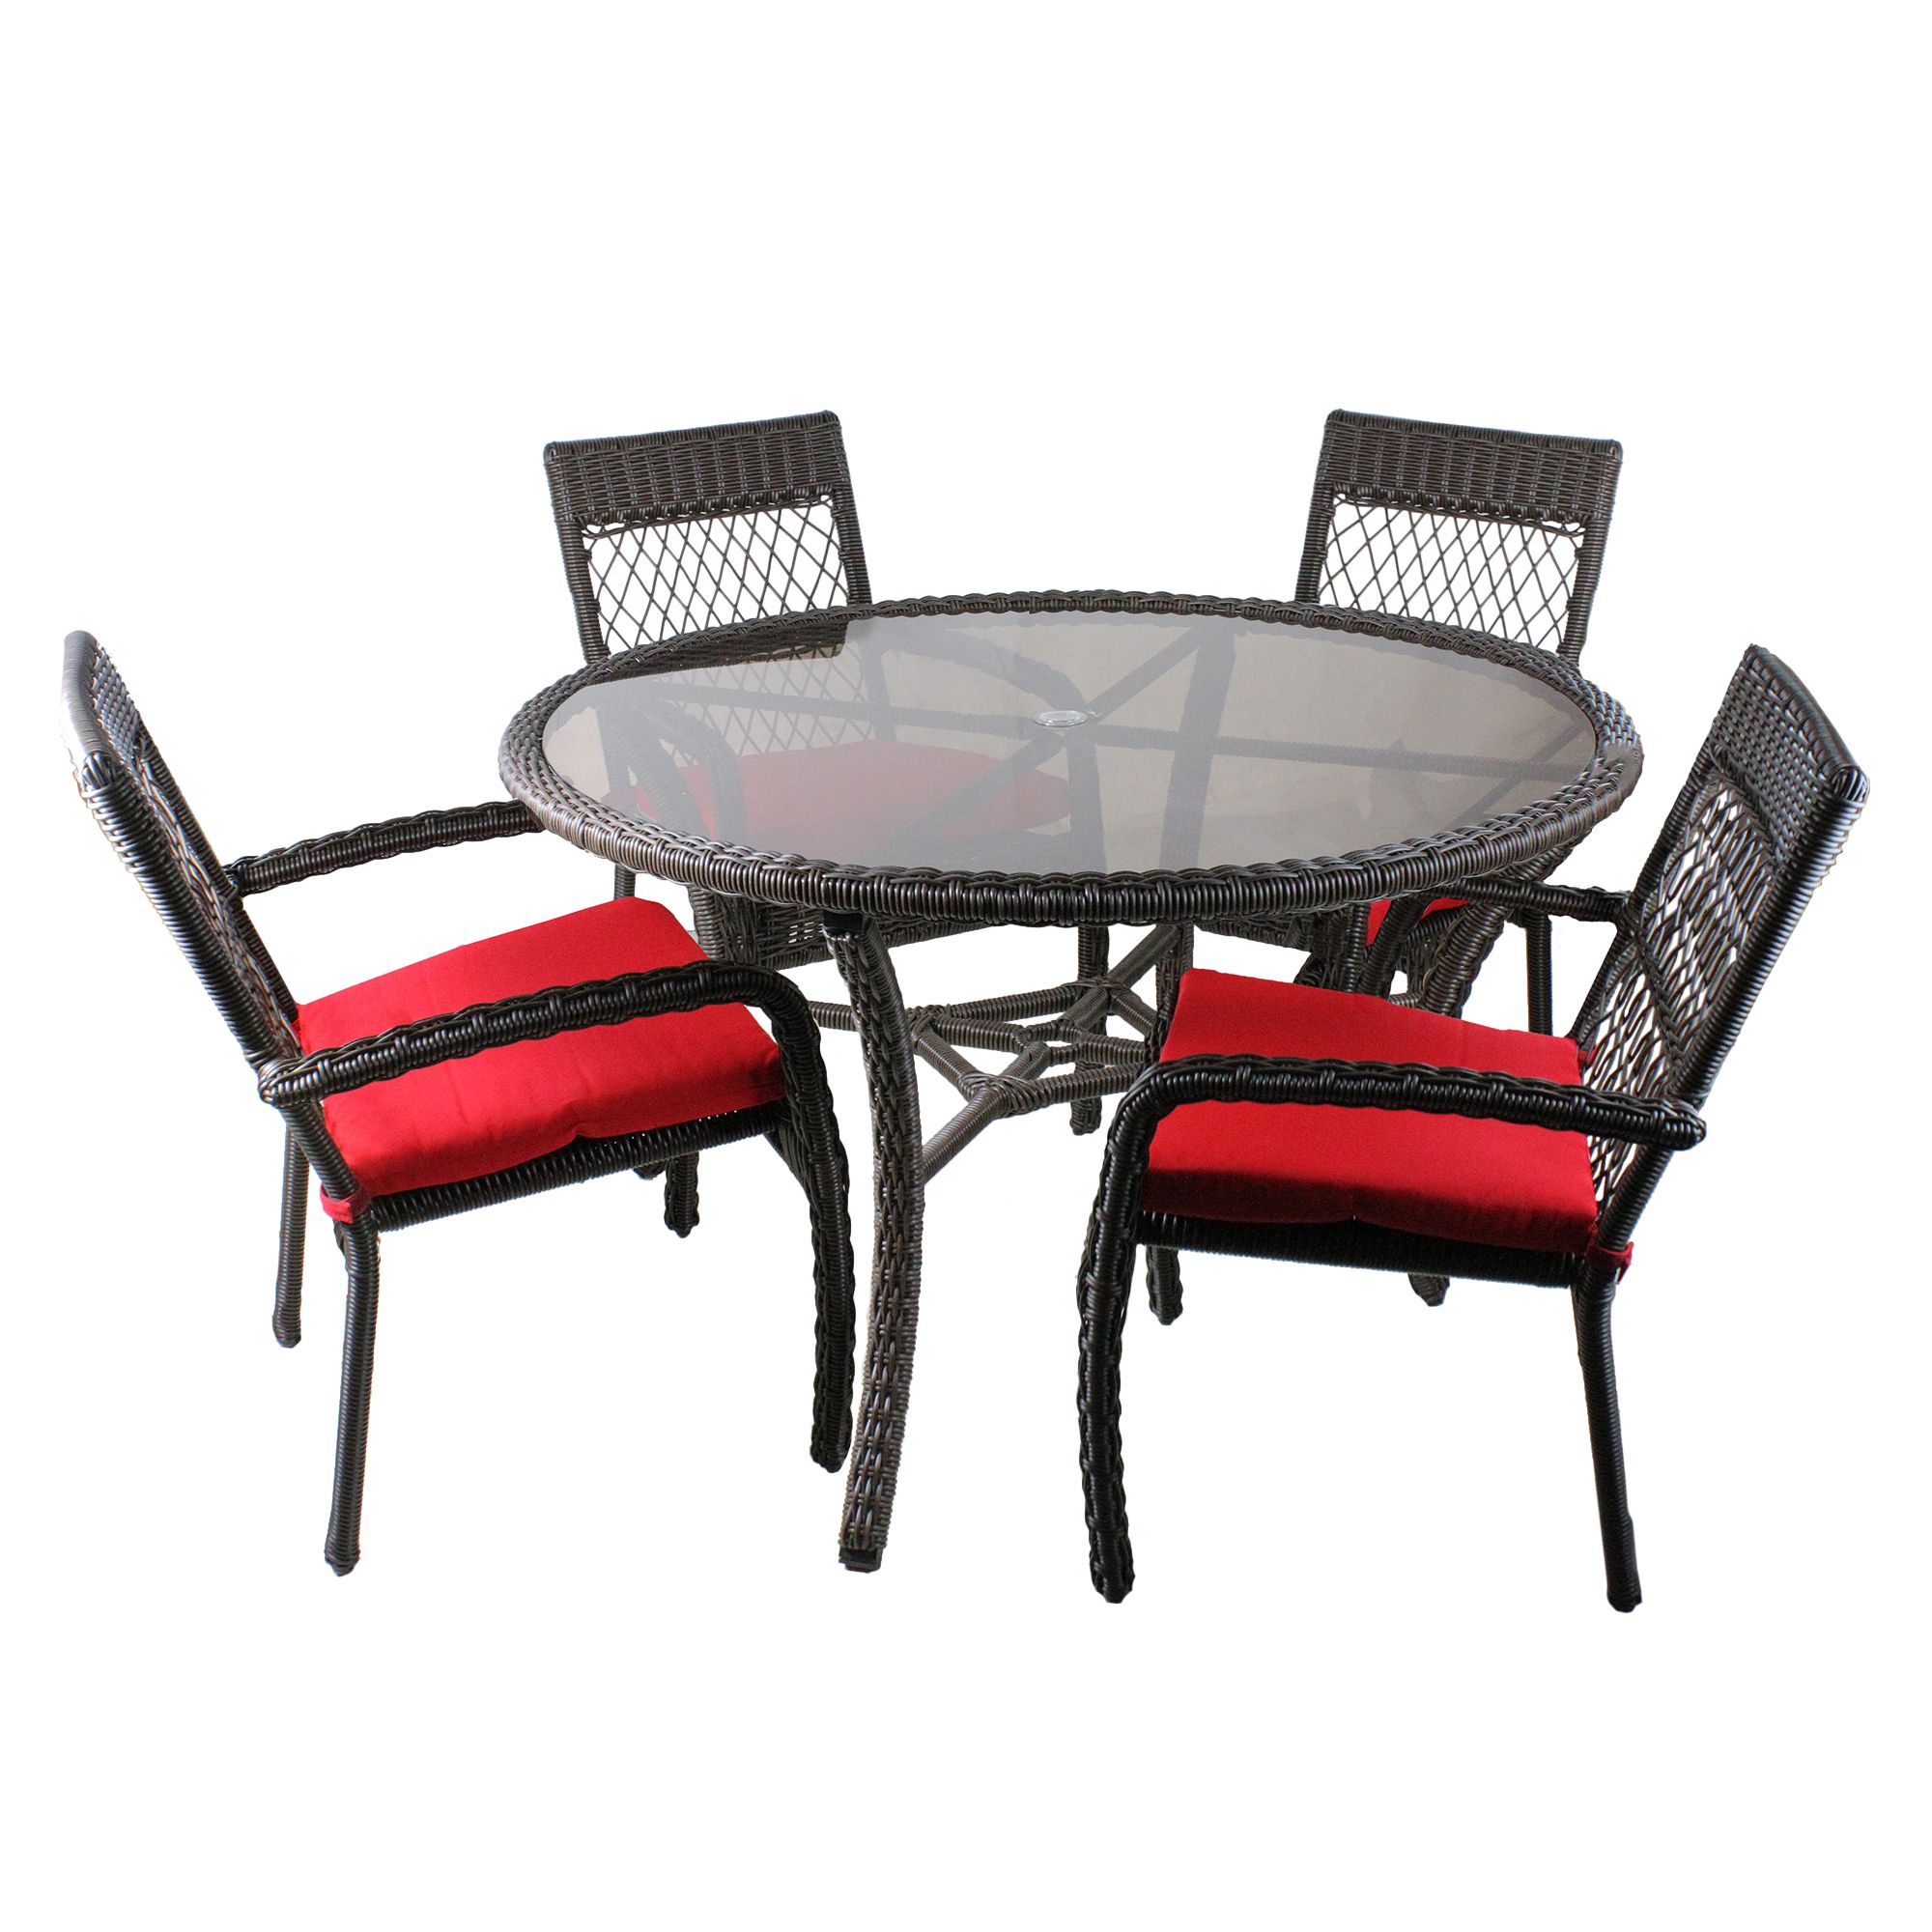 5 Piece Brown And Red Weaved Wicker Outdoor Chair And Dining Table Set Intended For Red 5 Piece Outdoor Dining Sets (View 13 of 15)